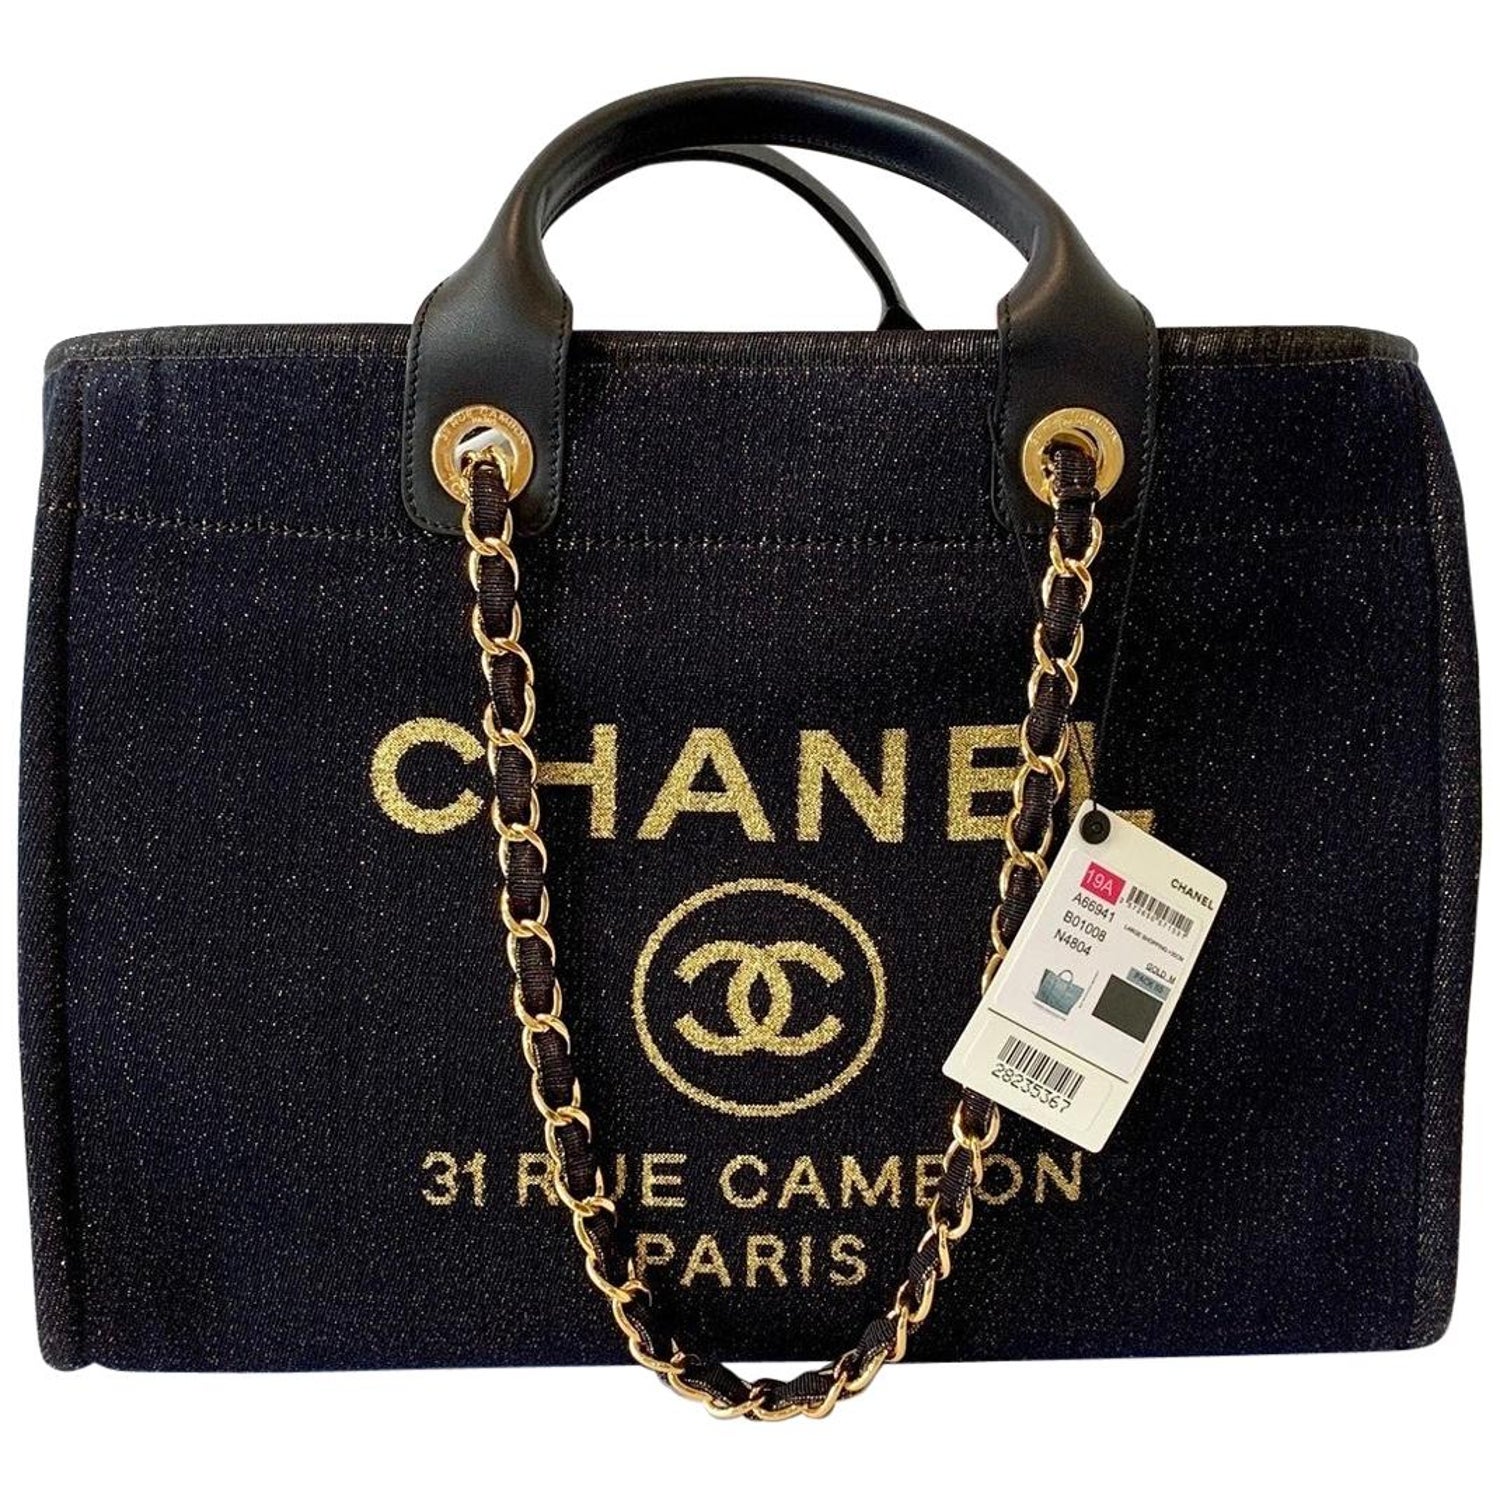 Top 80+ imagen chanel deauville tote inspired - Thcshoanghoatham-badinh ...